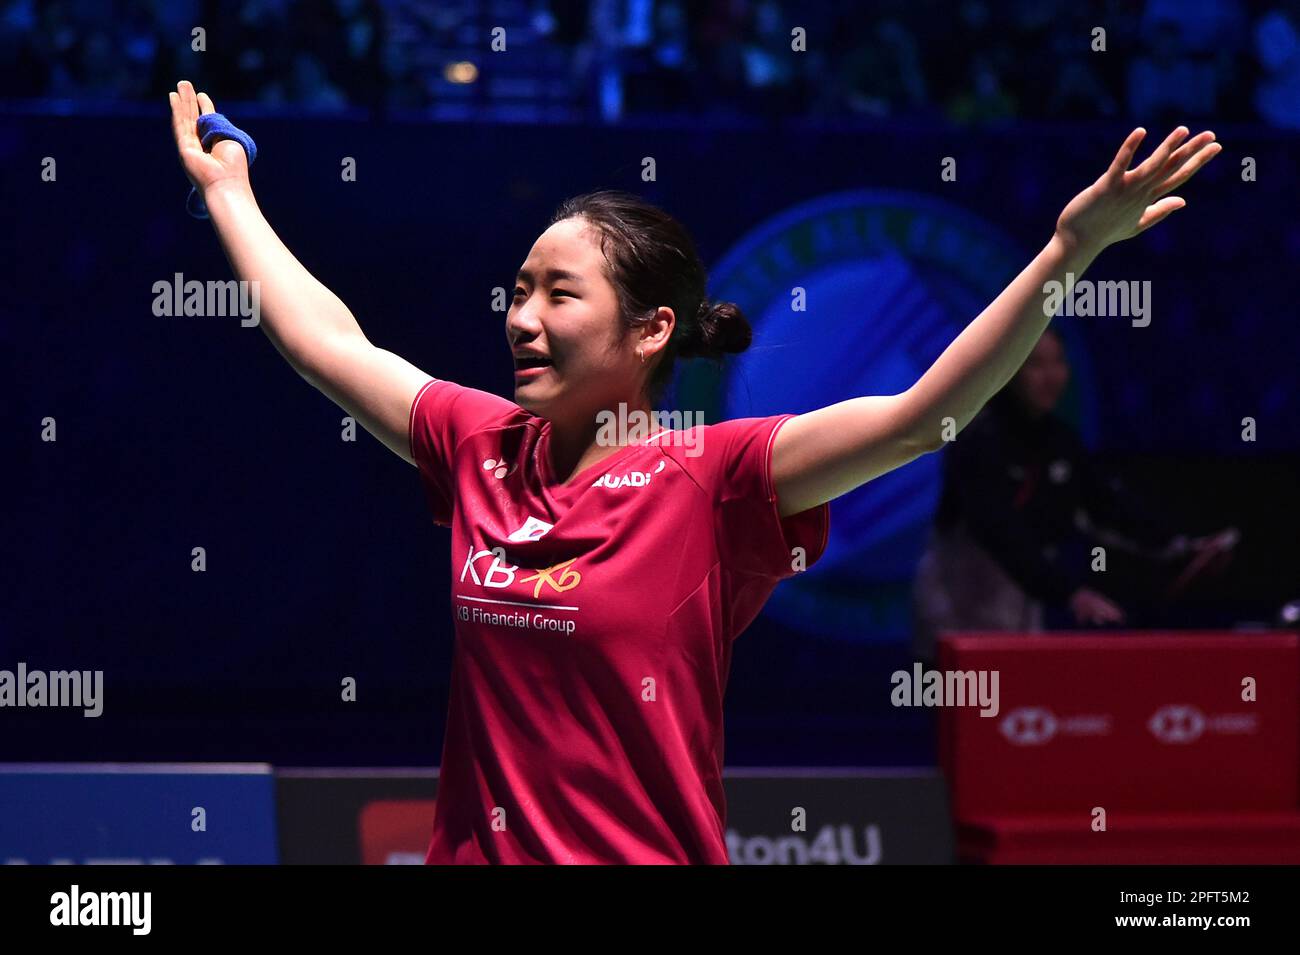 Koreas An Se Young reacts after defeating Chinese Taipeis Tai Tzu Ying during the womens semi final match in the All England Open Badminton Championships at the Utilita Arena in Birmingham, England,